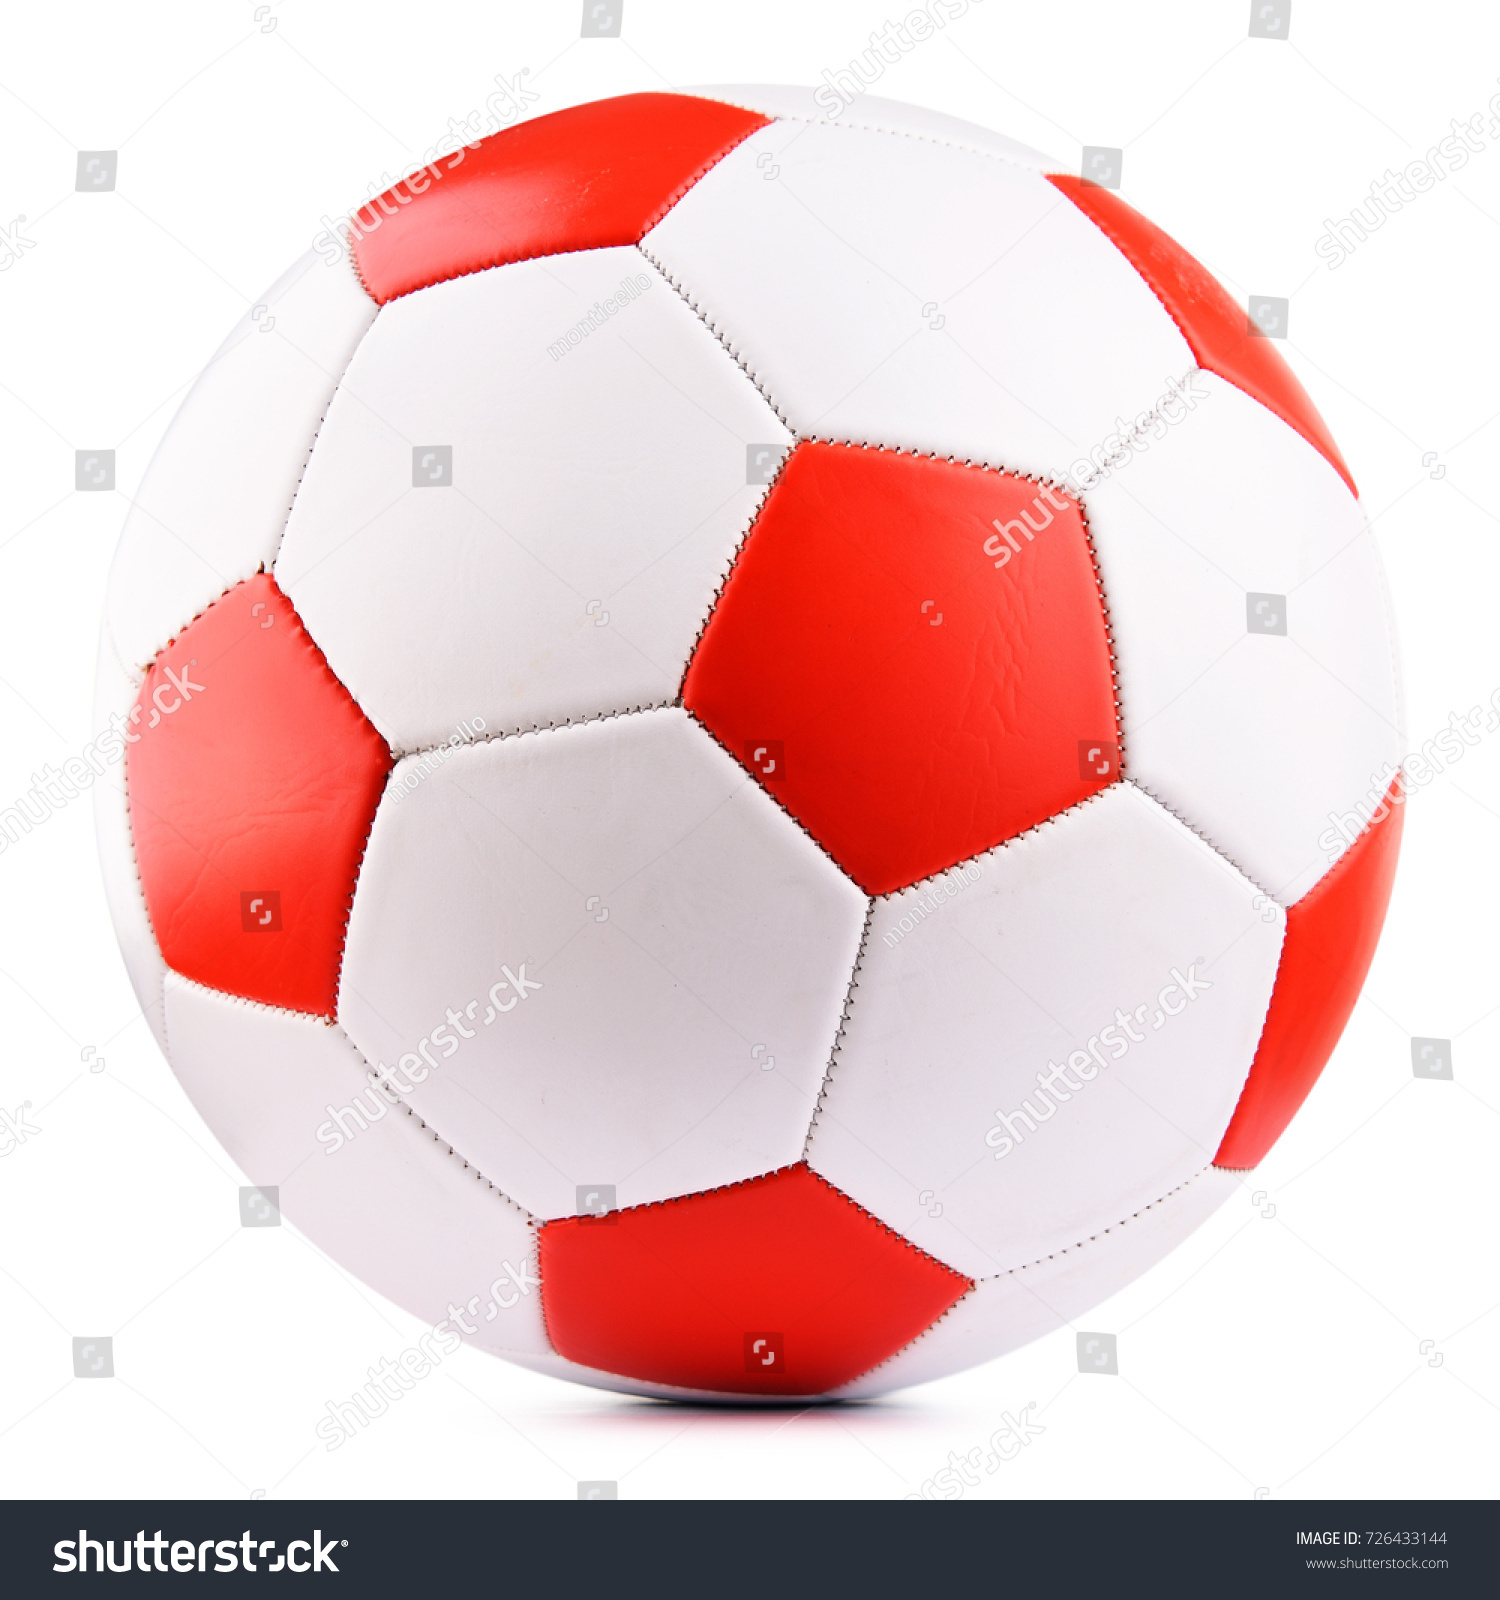 Leather soccer ball isolated on white background. #726433144